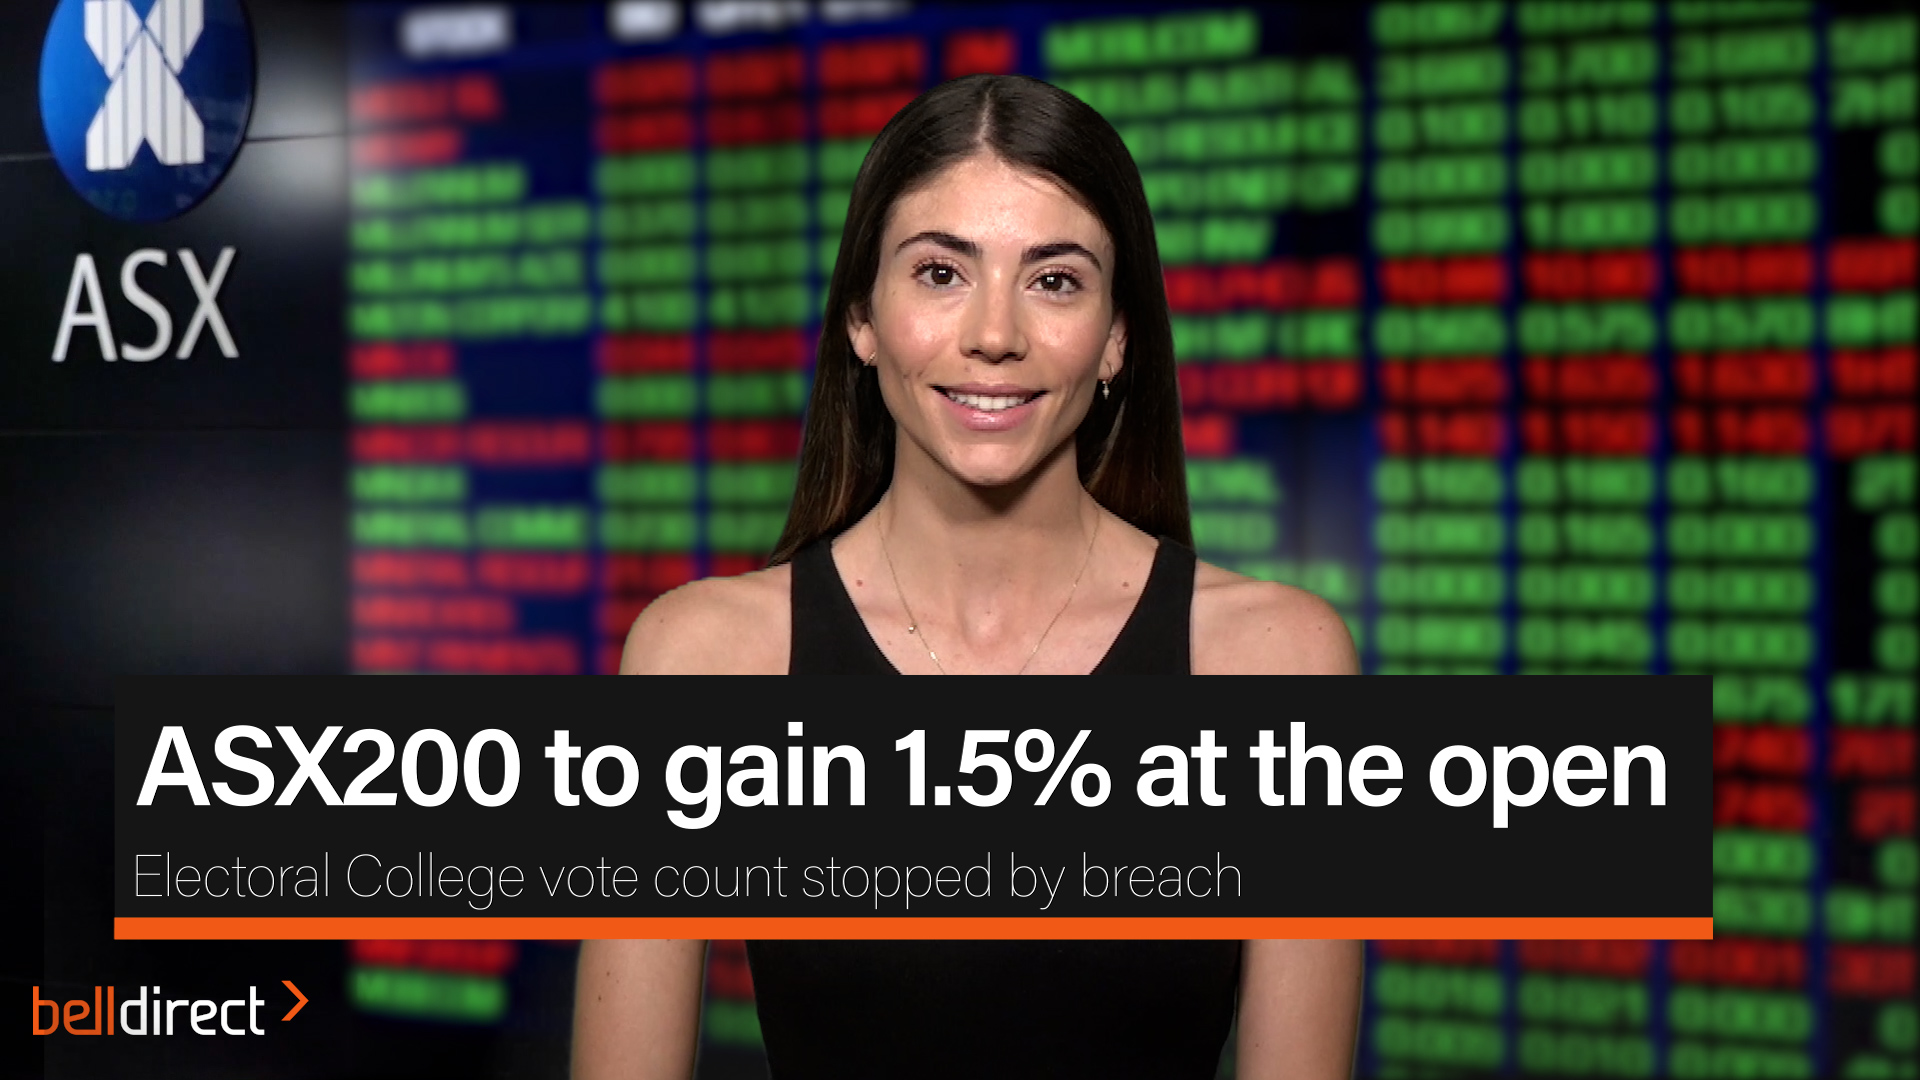 ASX200 to gain 1.5% at the open